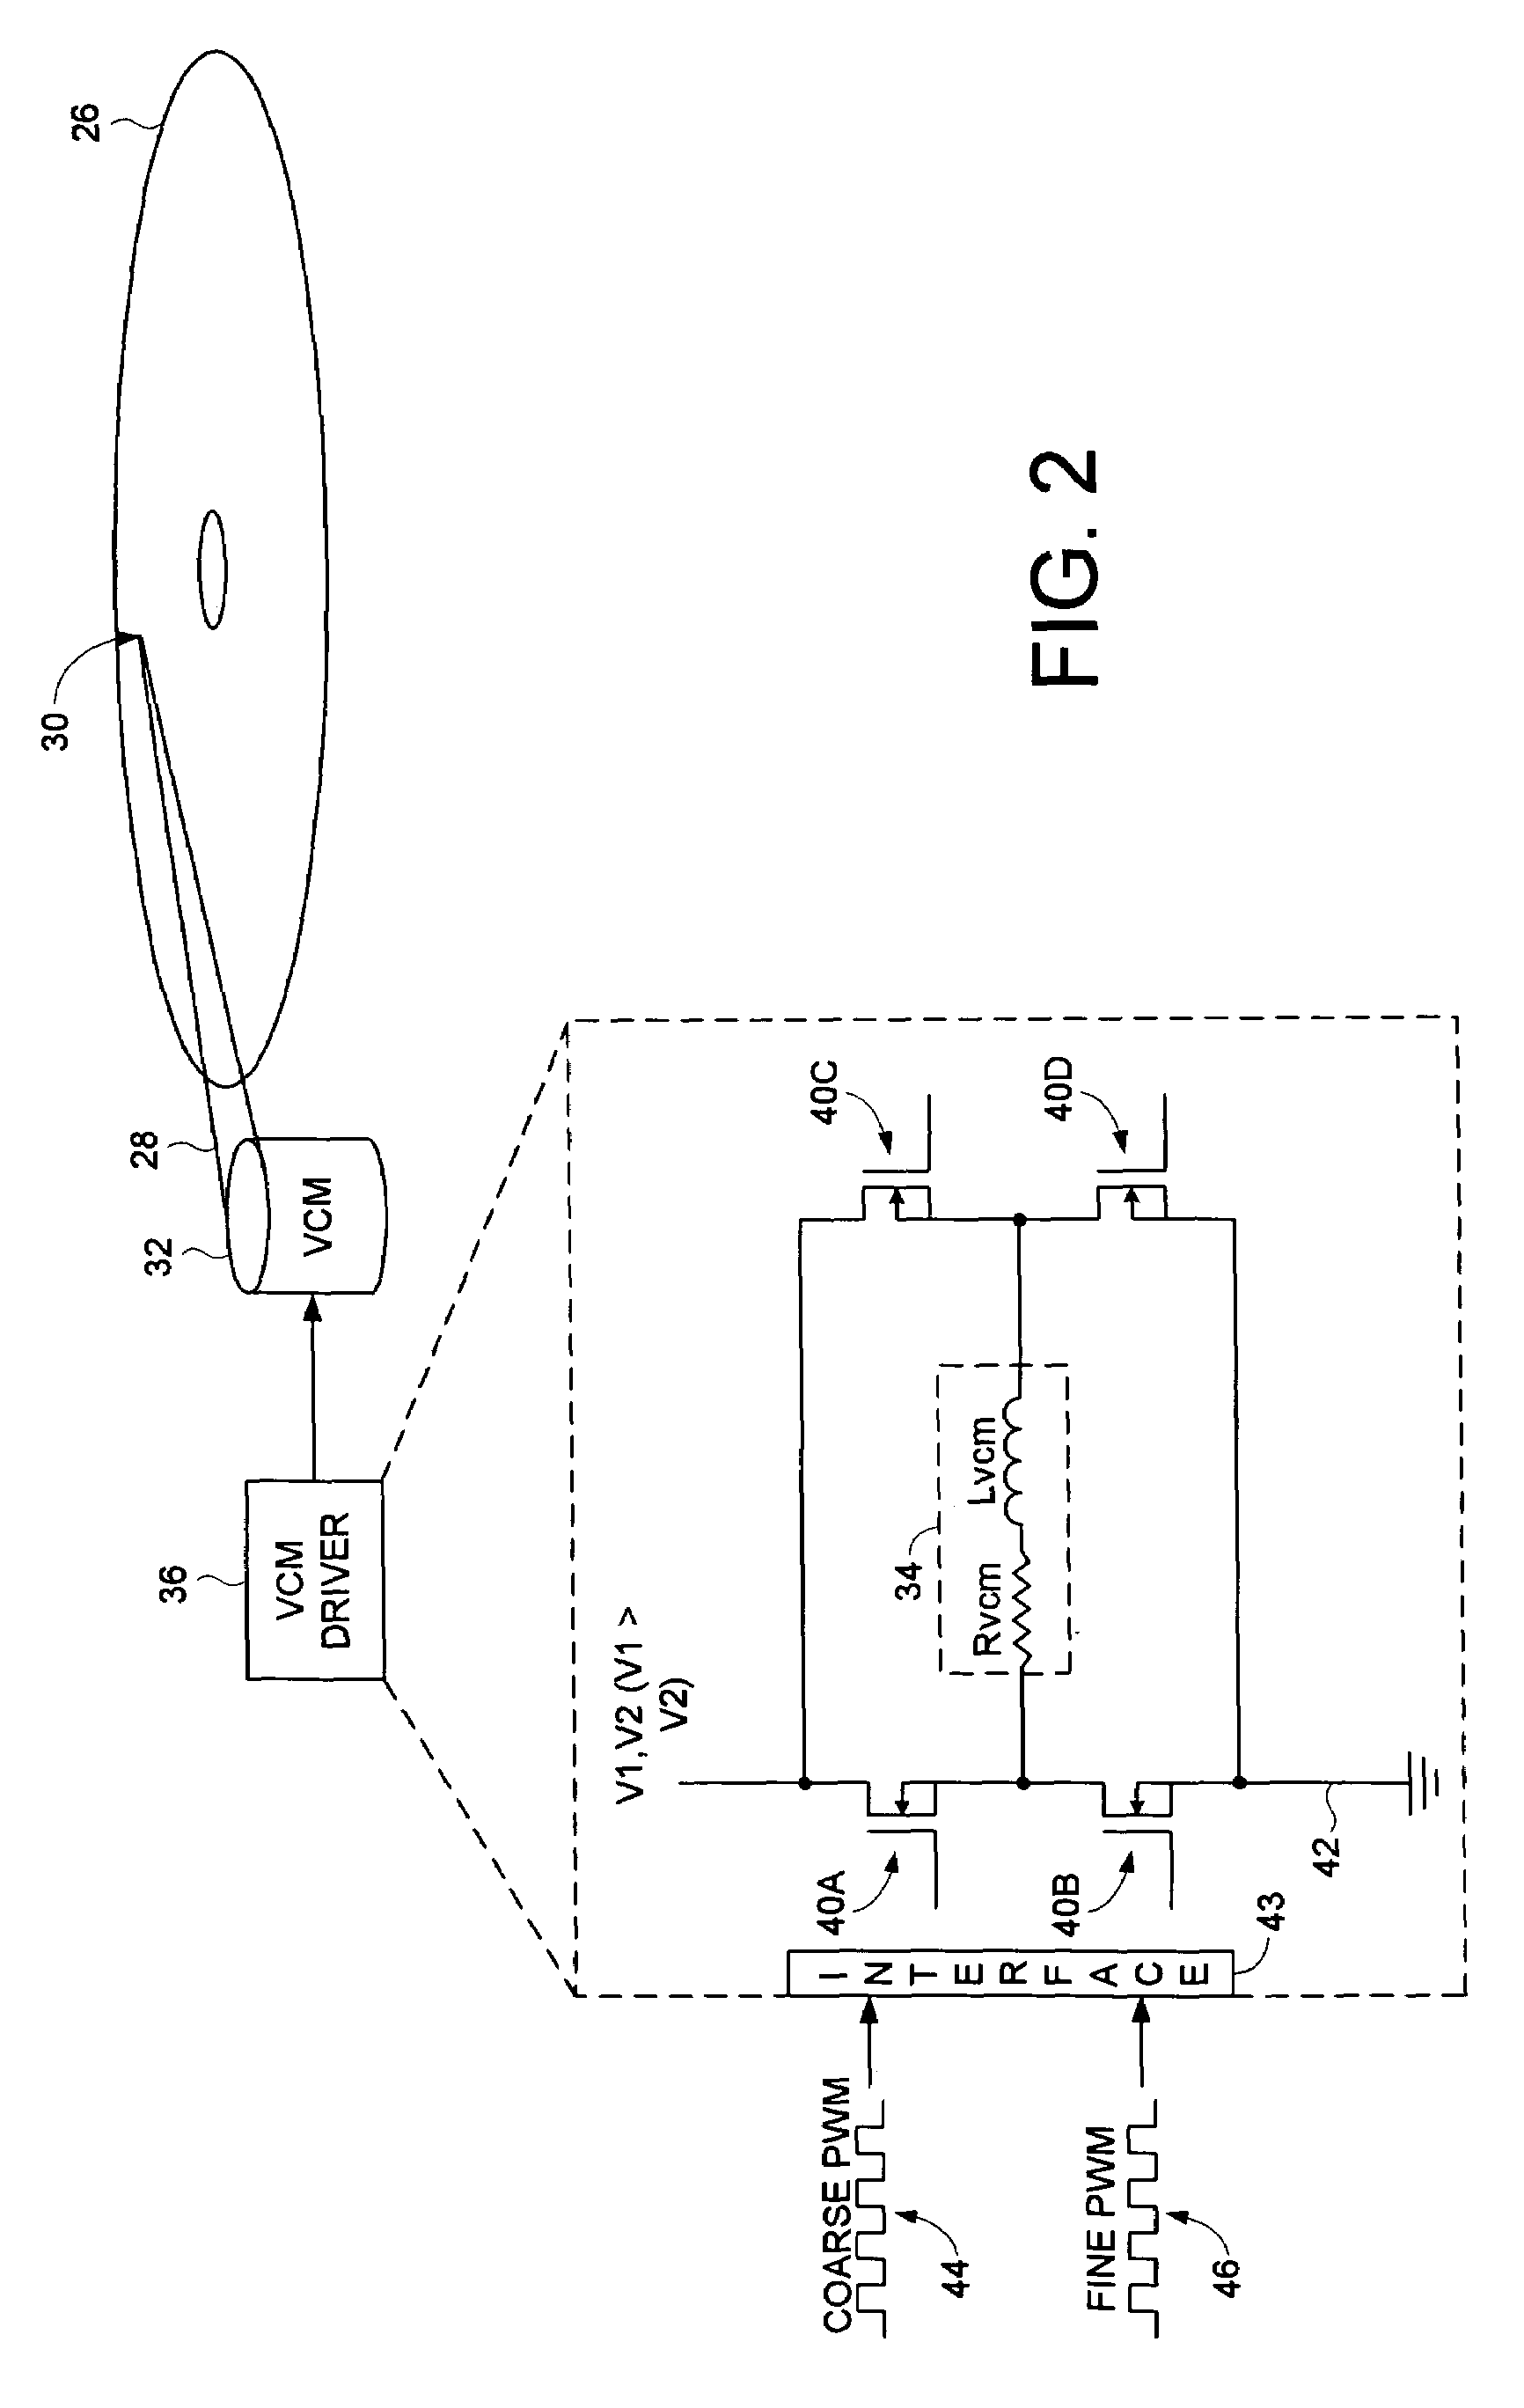 Disk drive employing a multi-stage pulse width modulated voice coil motor driver